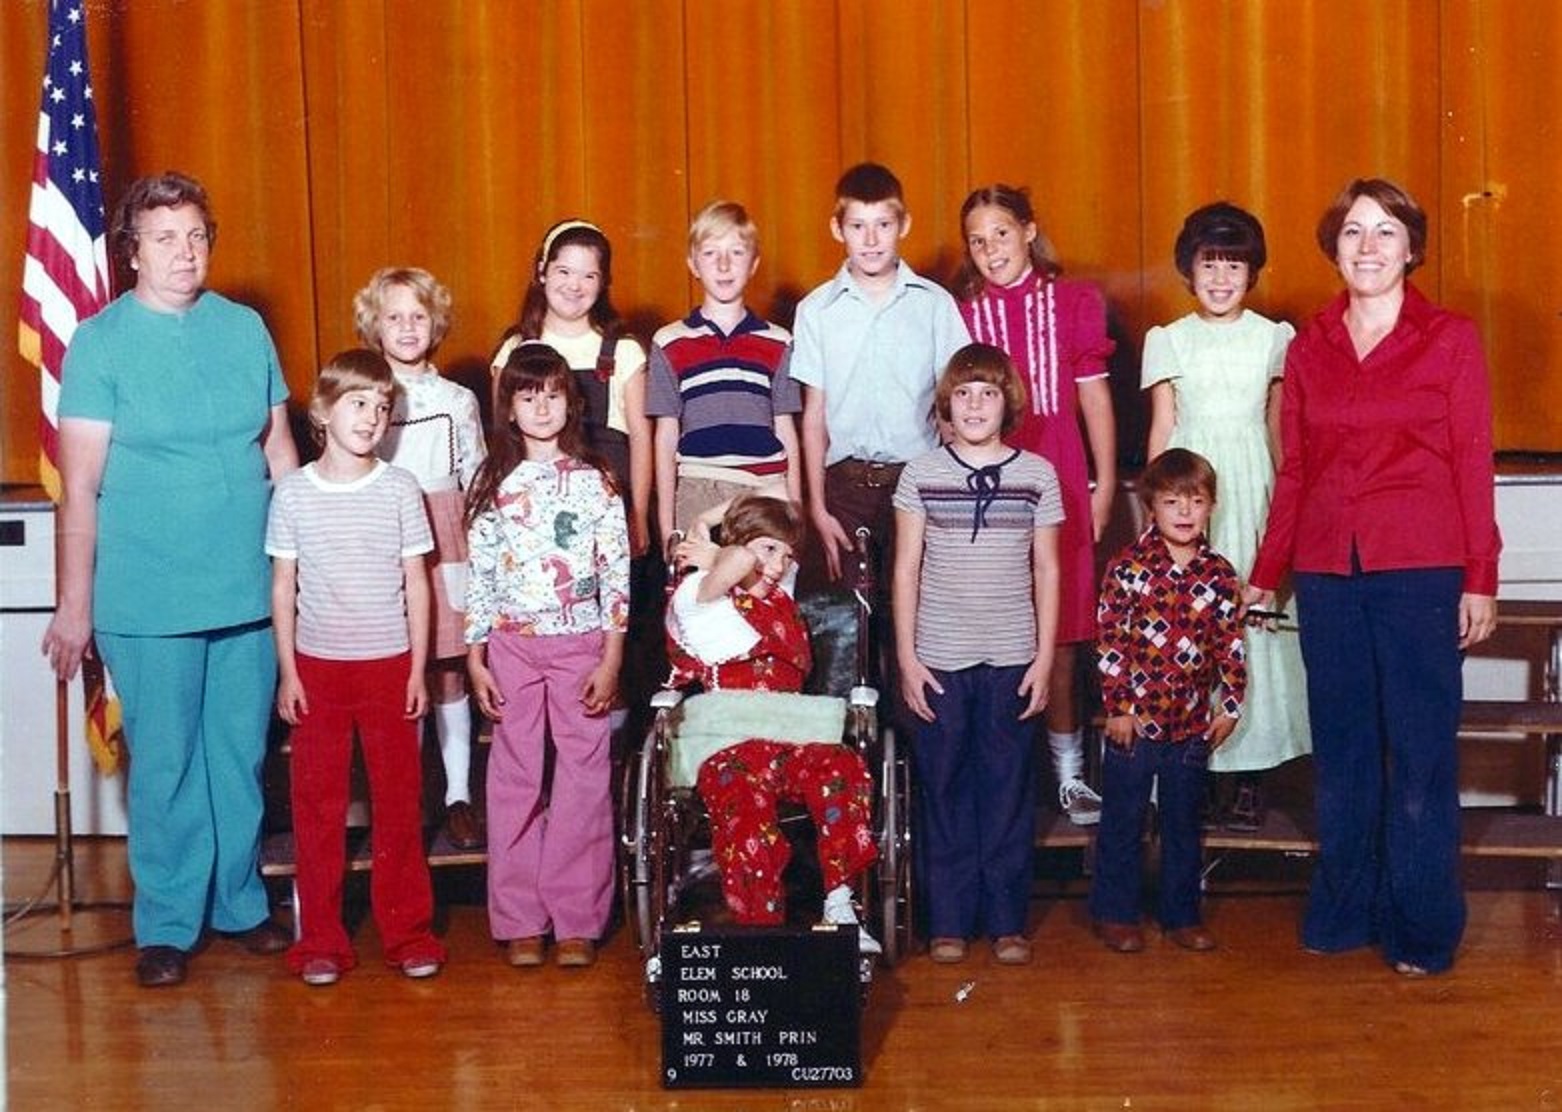 Miss Diane Gray's 1977-1978 special education class at East Elementary School